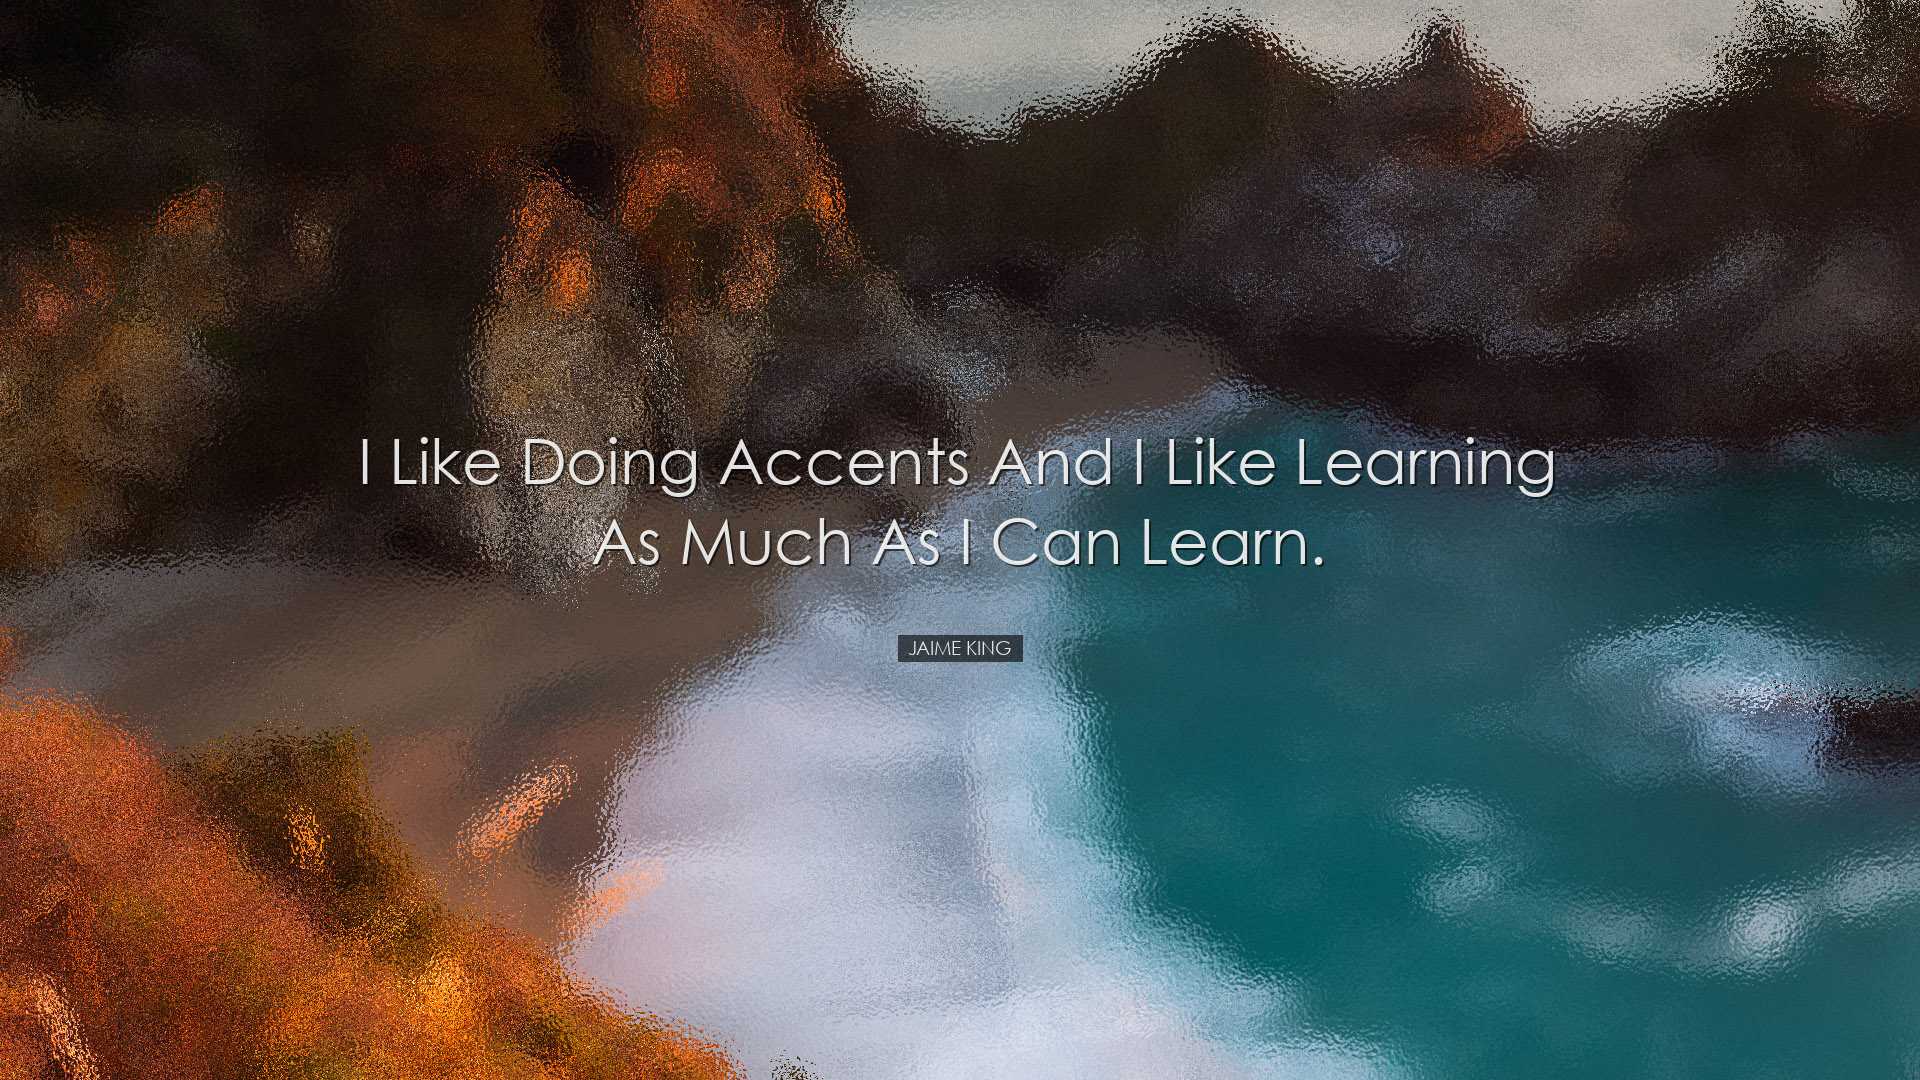 I like doing accents and I like learning as much as I can learn. -